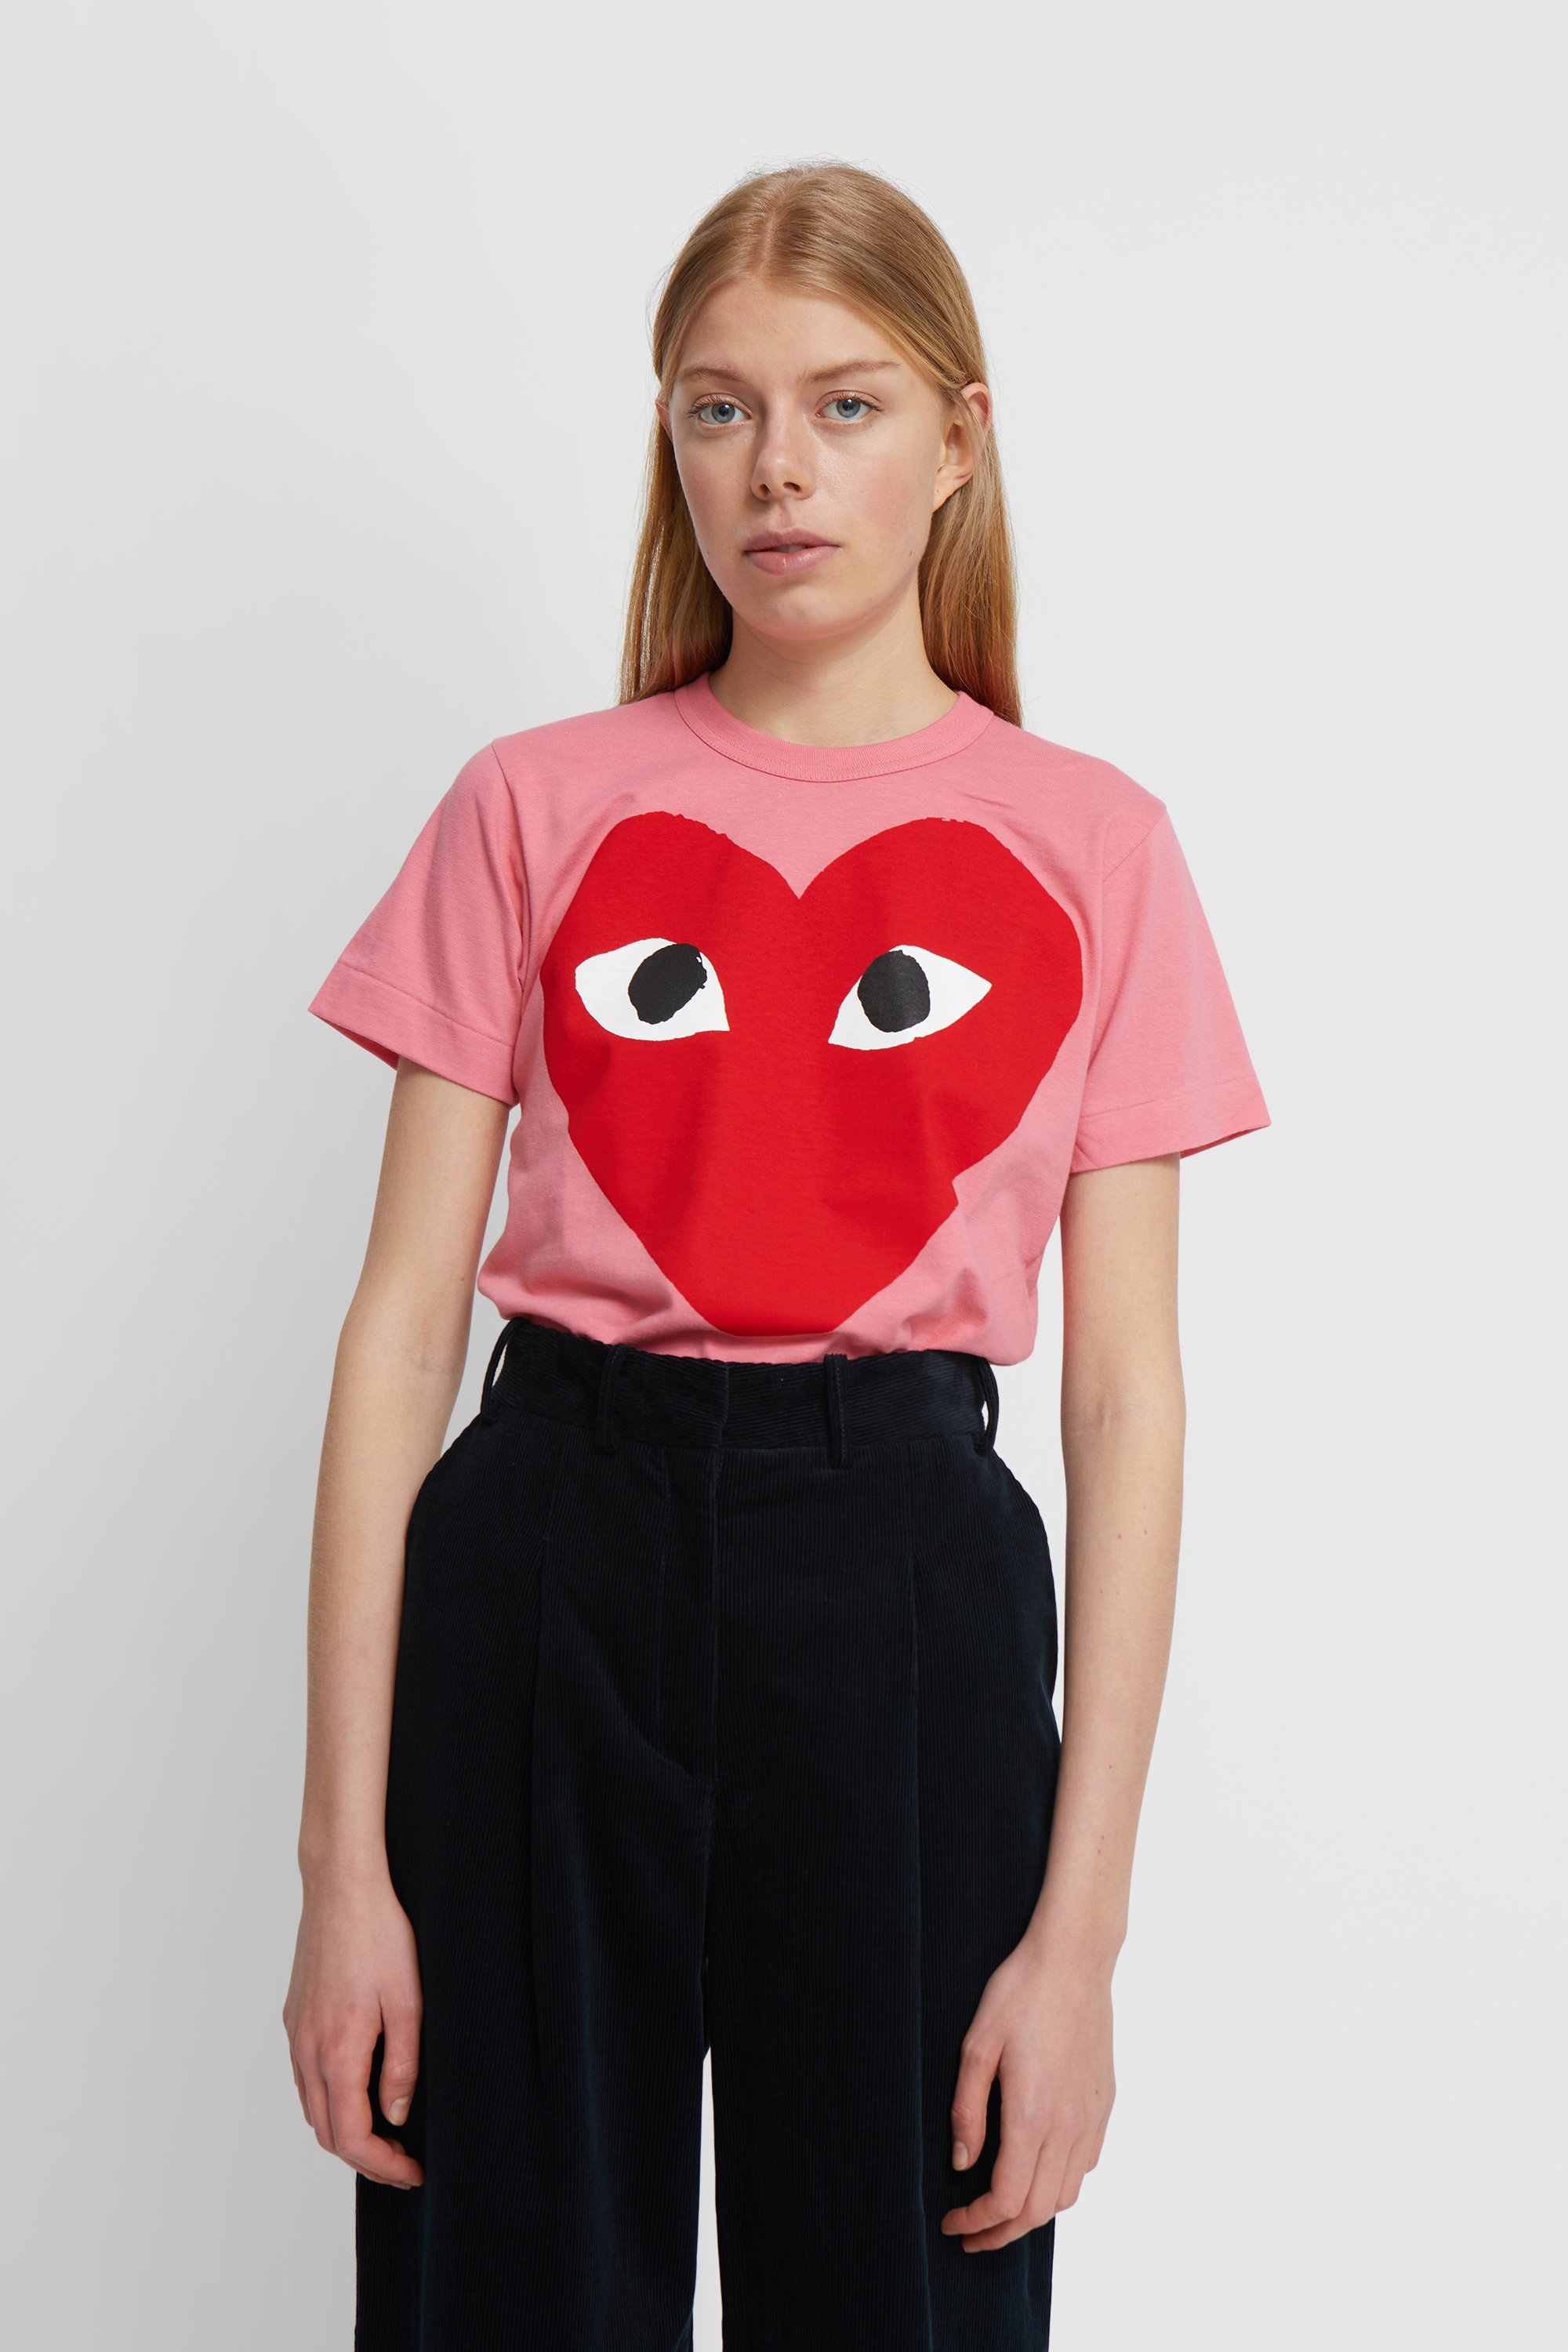 play comme des garcons womens t shirt